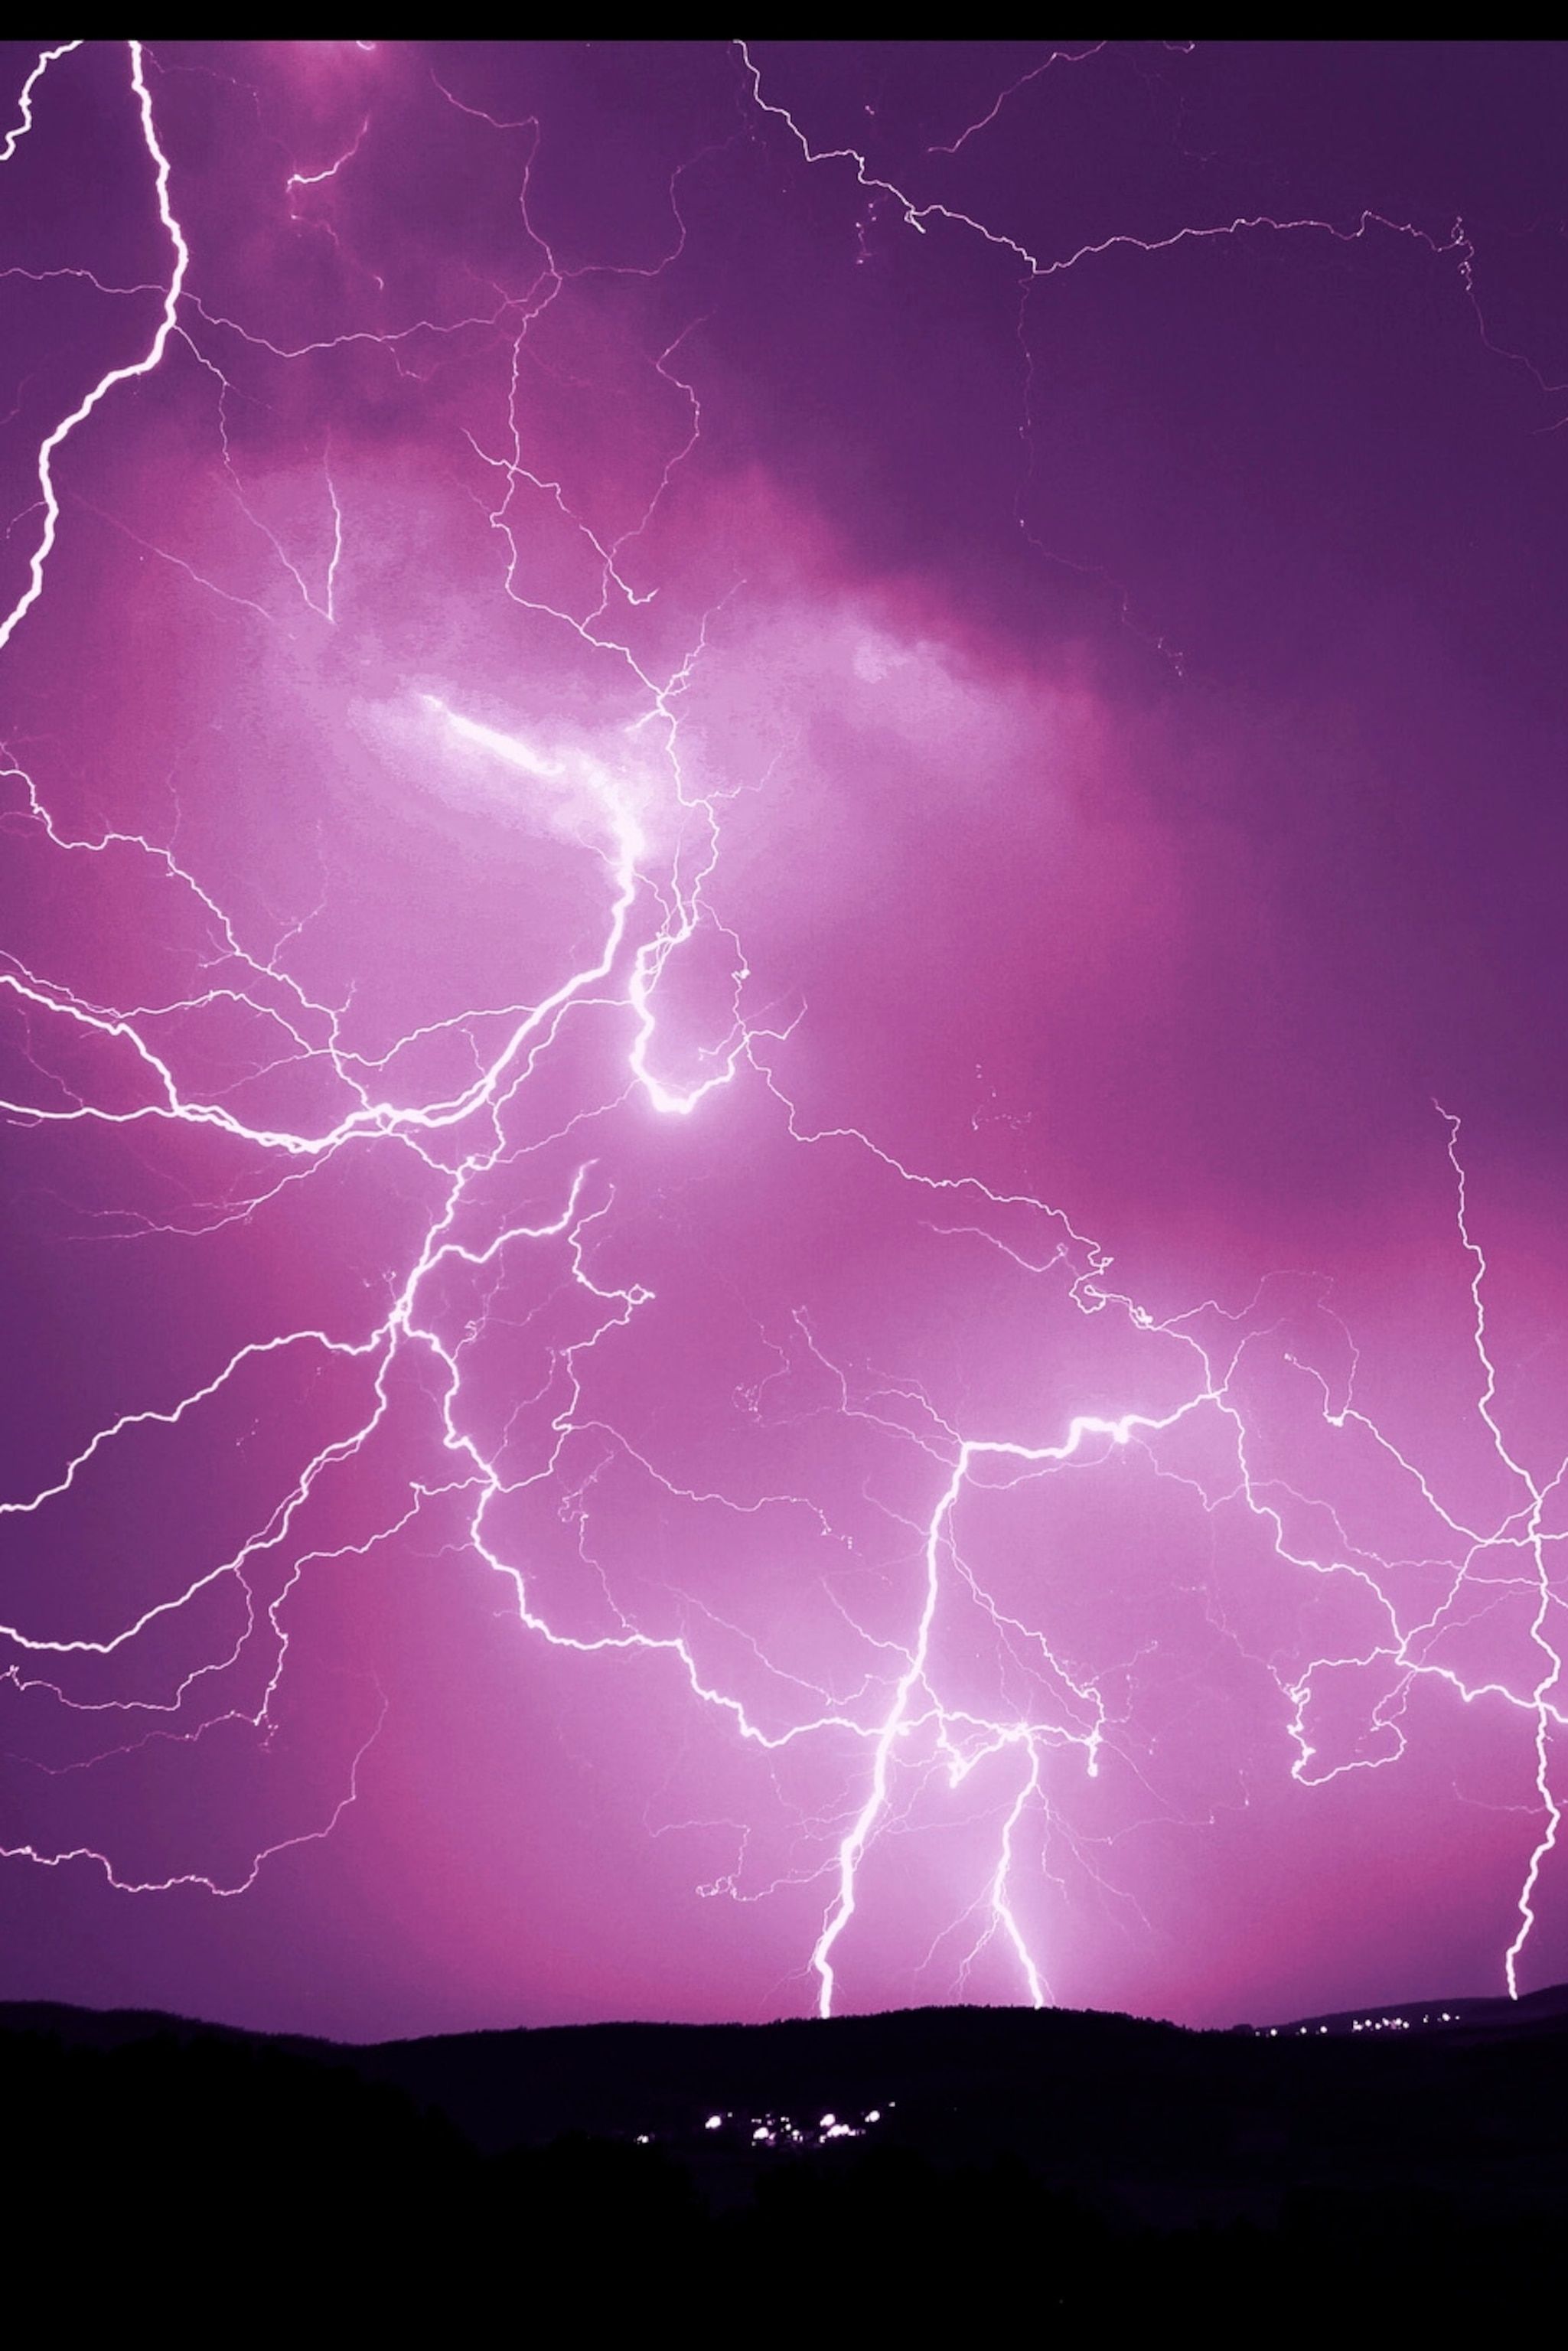 A purple sky with lightning bolts in it. - Storm